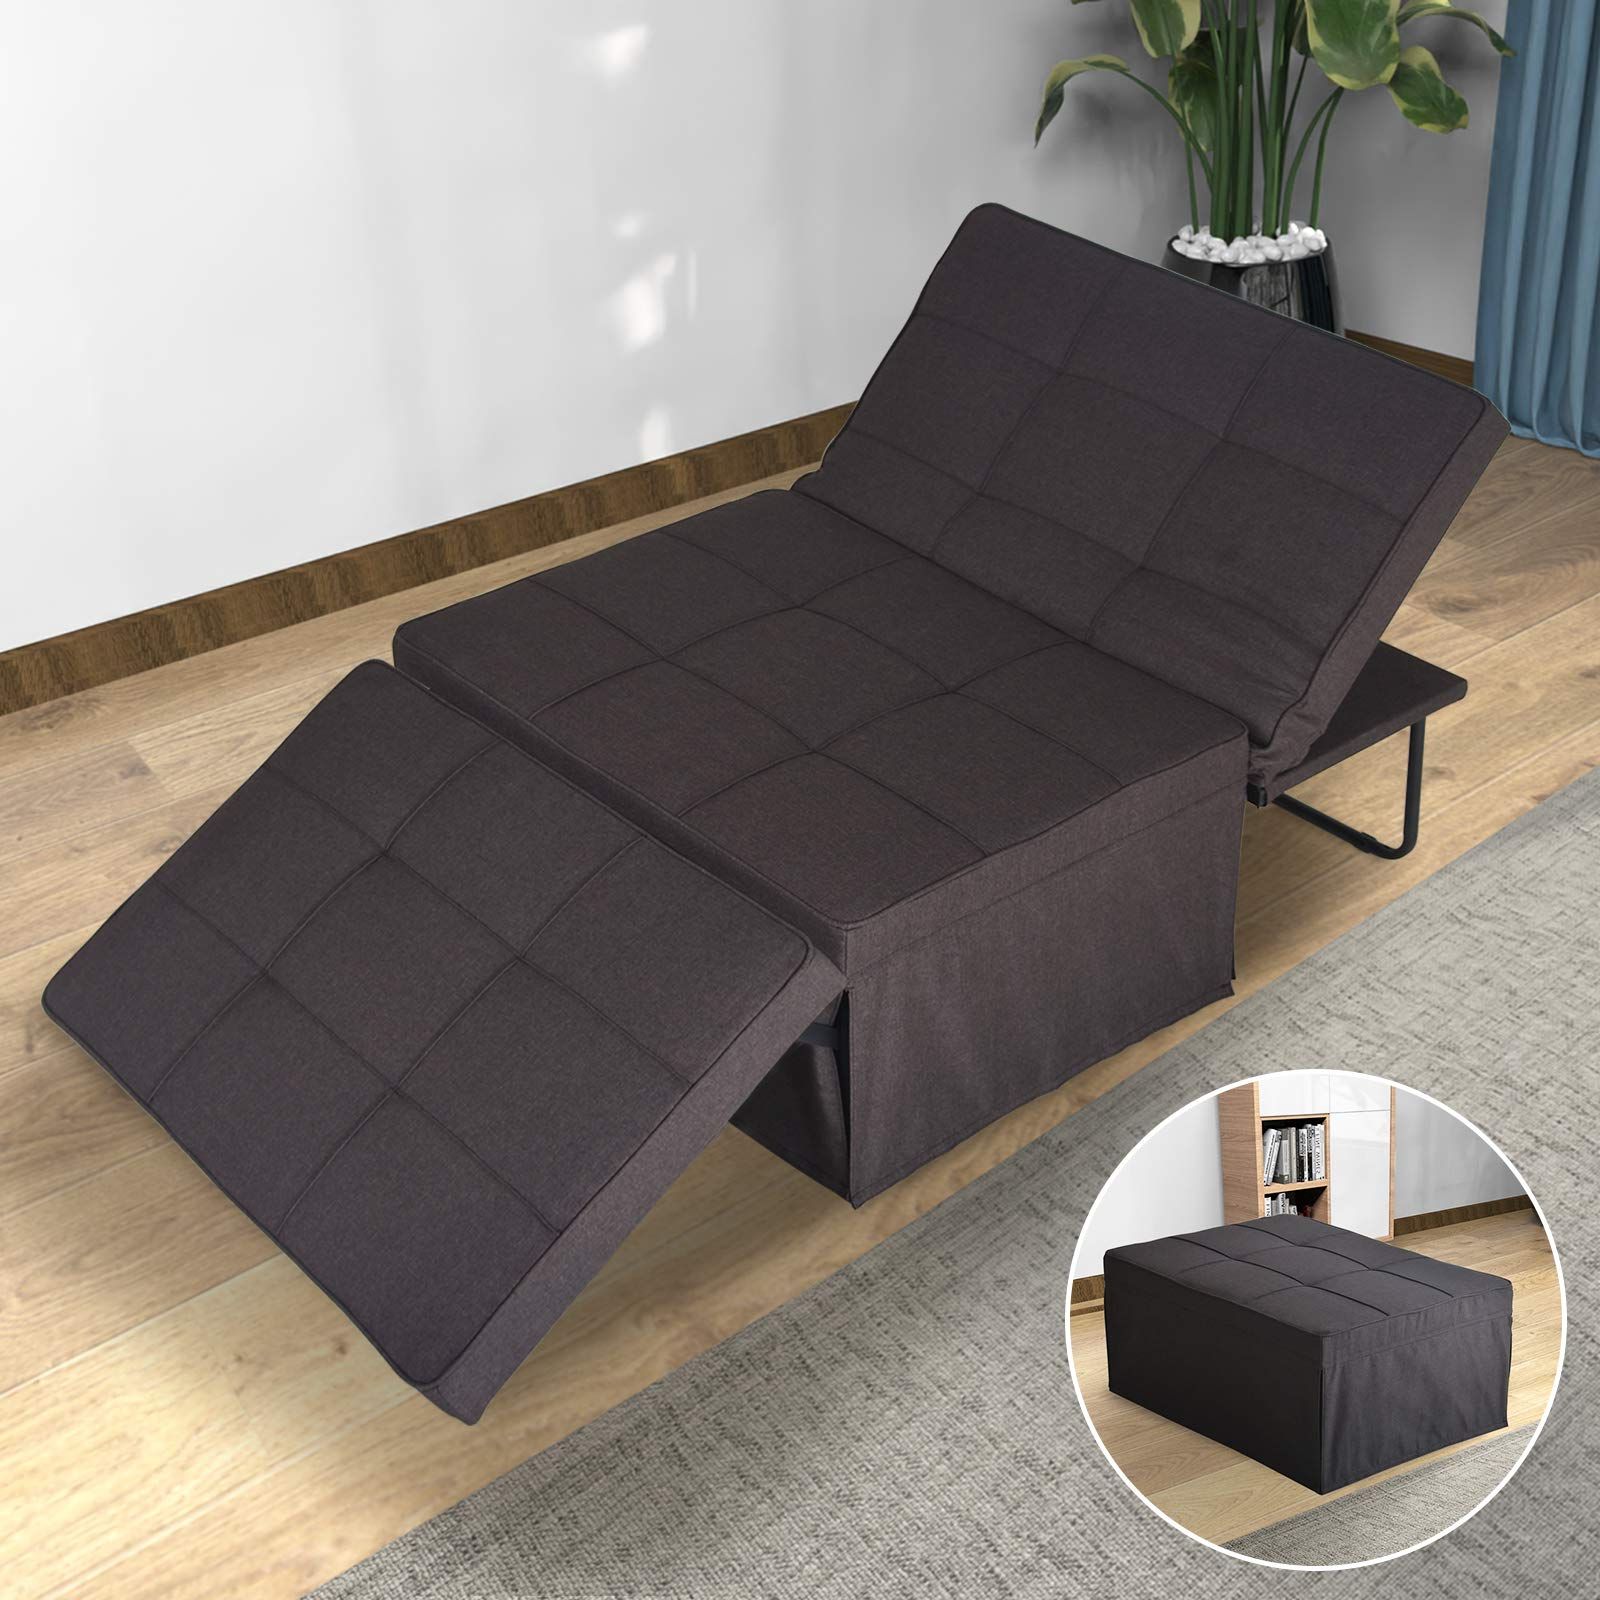 4 In 1 Convertible Sleeper Chair Beds With Regard To Most Popular Sofa Bed, Sleeper Chair Bed, 4 In 1 Multi Function Convertible Chair (View 9 of 15)